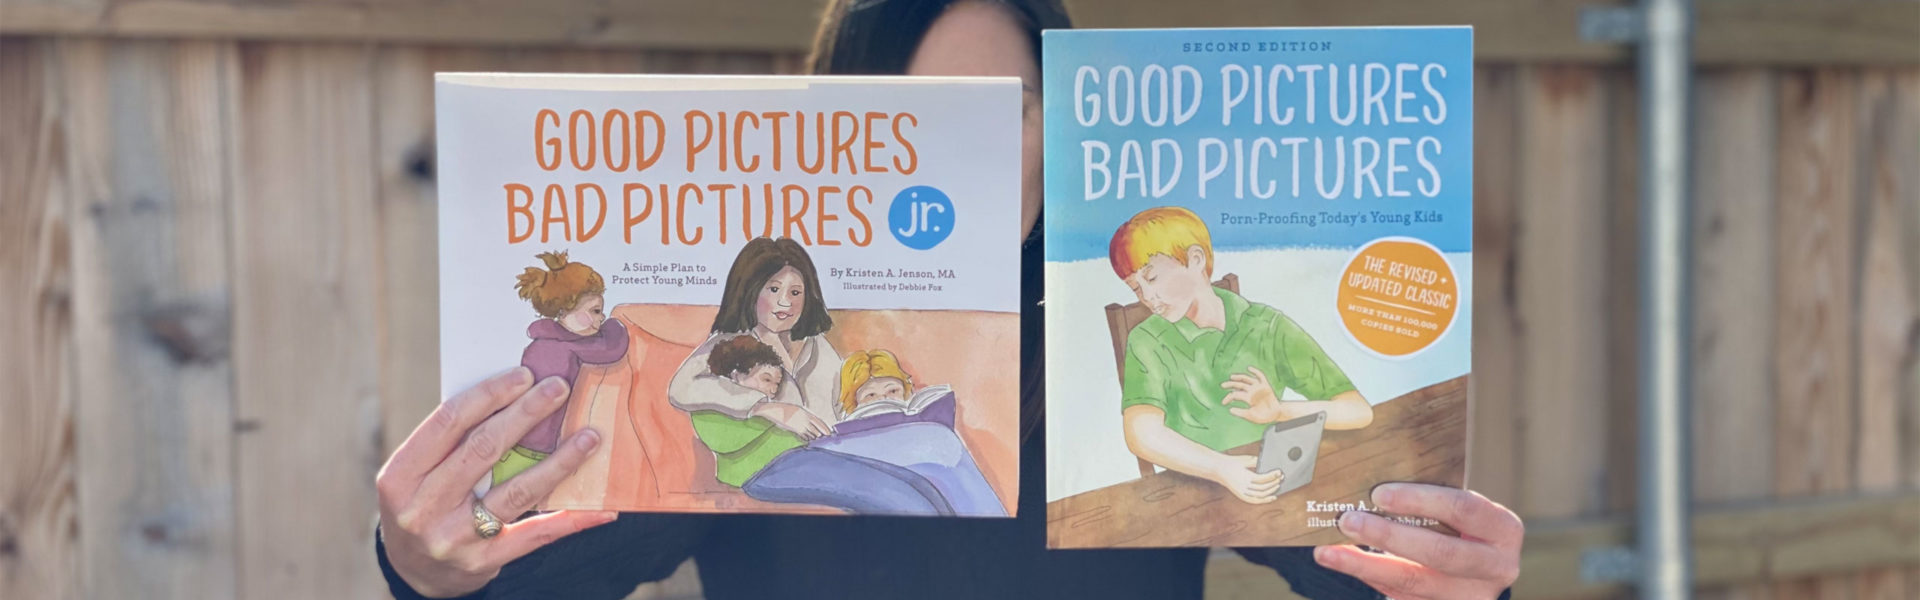 Good Pictures Bad Pictures Books